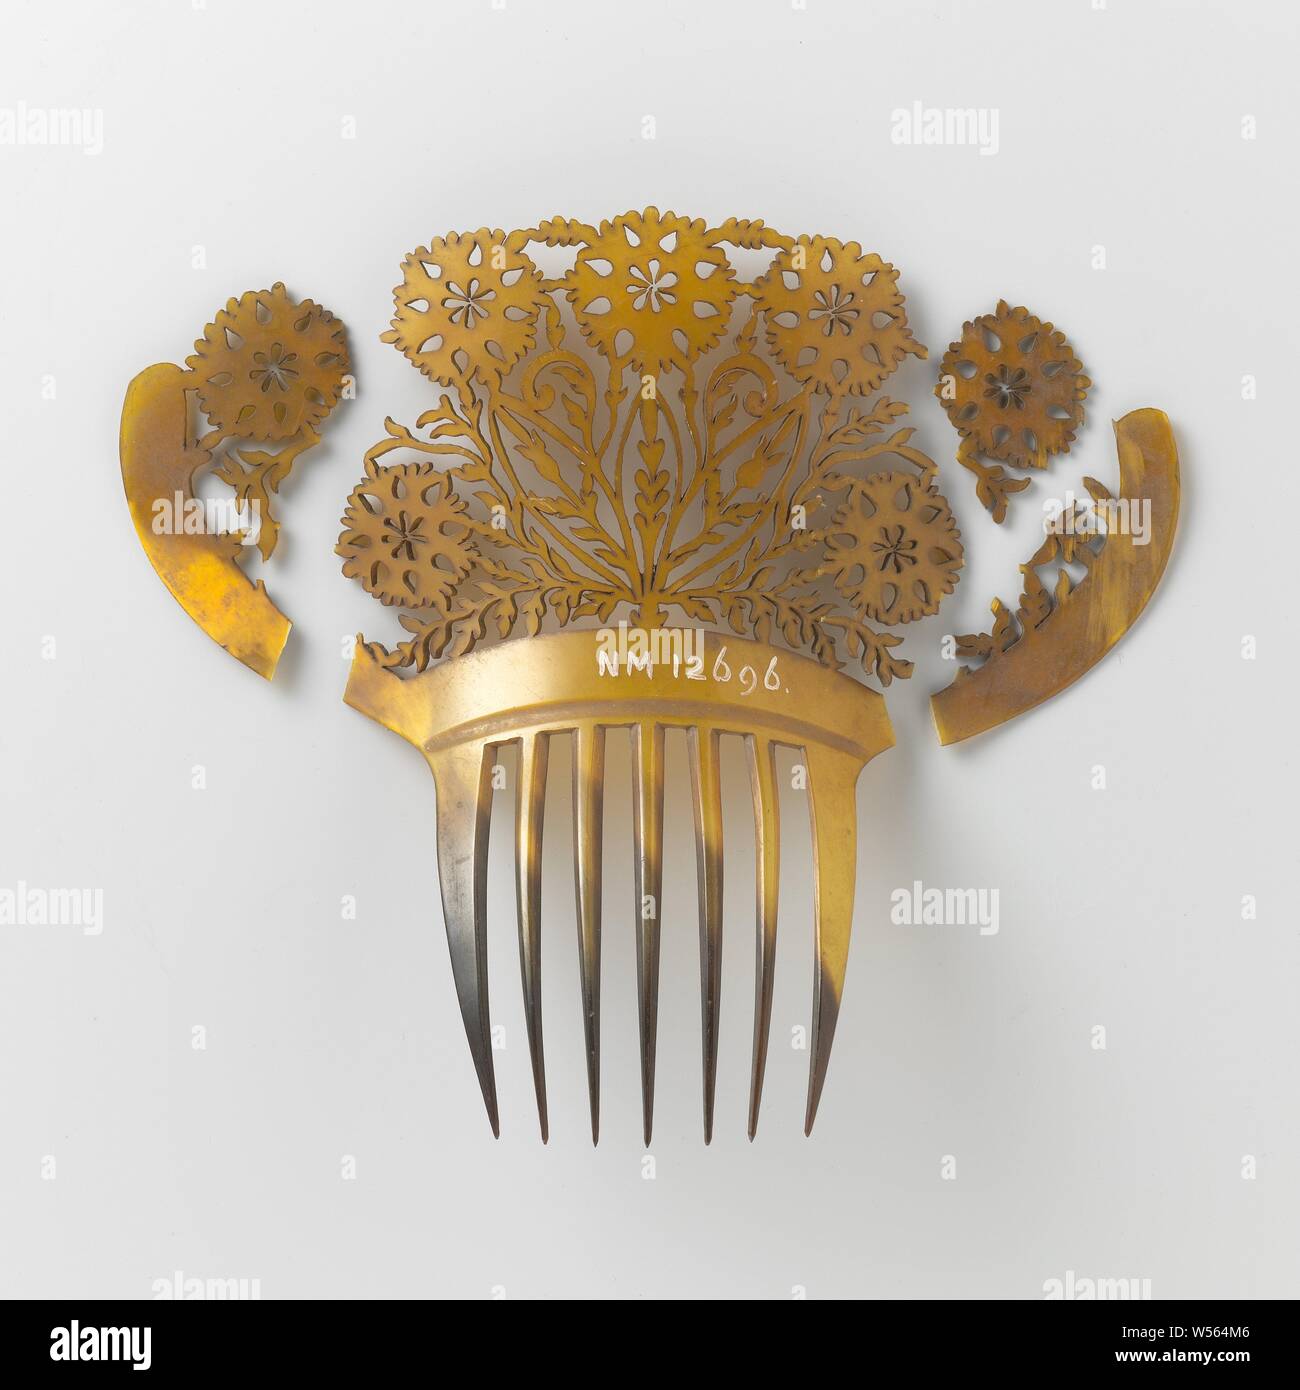 Hair comb of blond tortoise with seven teeth and ajour cut back with five floral patterns, chrysanthemum., anonymous, Netherlands, c. 1800 - c. 1825, polishing, h 18 cm × w 17.5 cm × d 4.5 cm Stock Photo